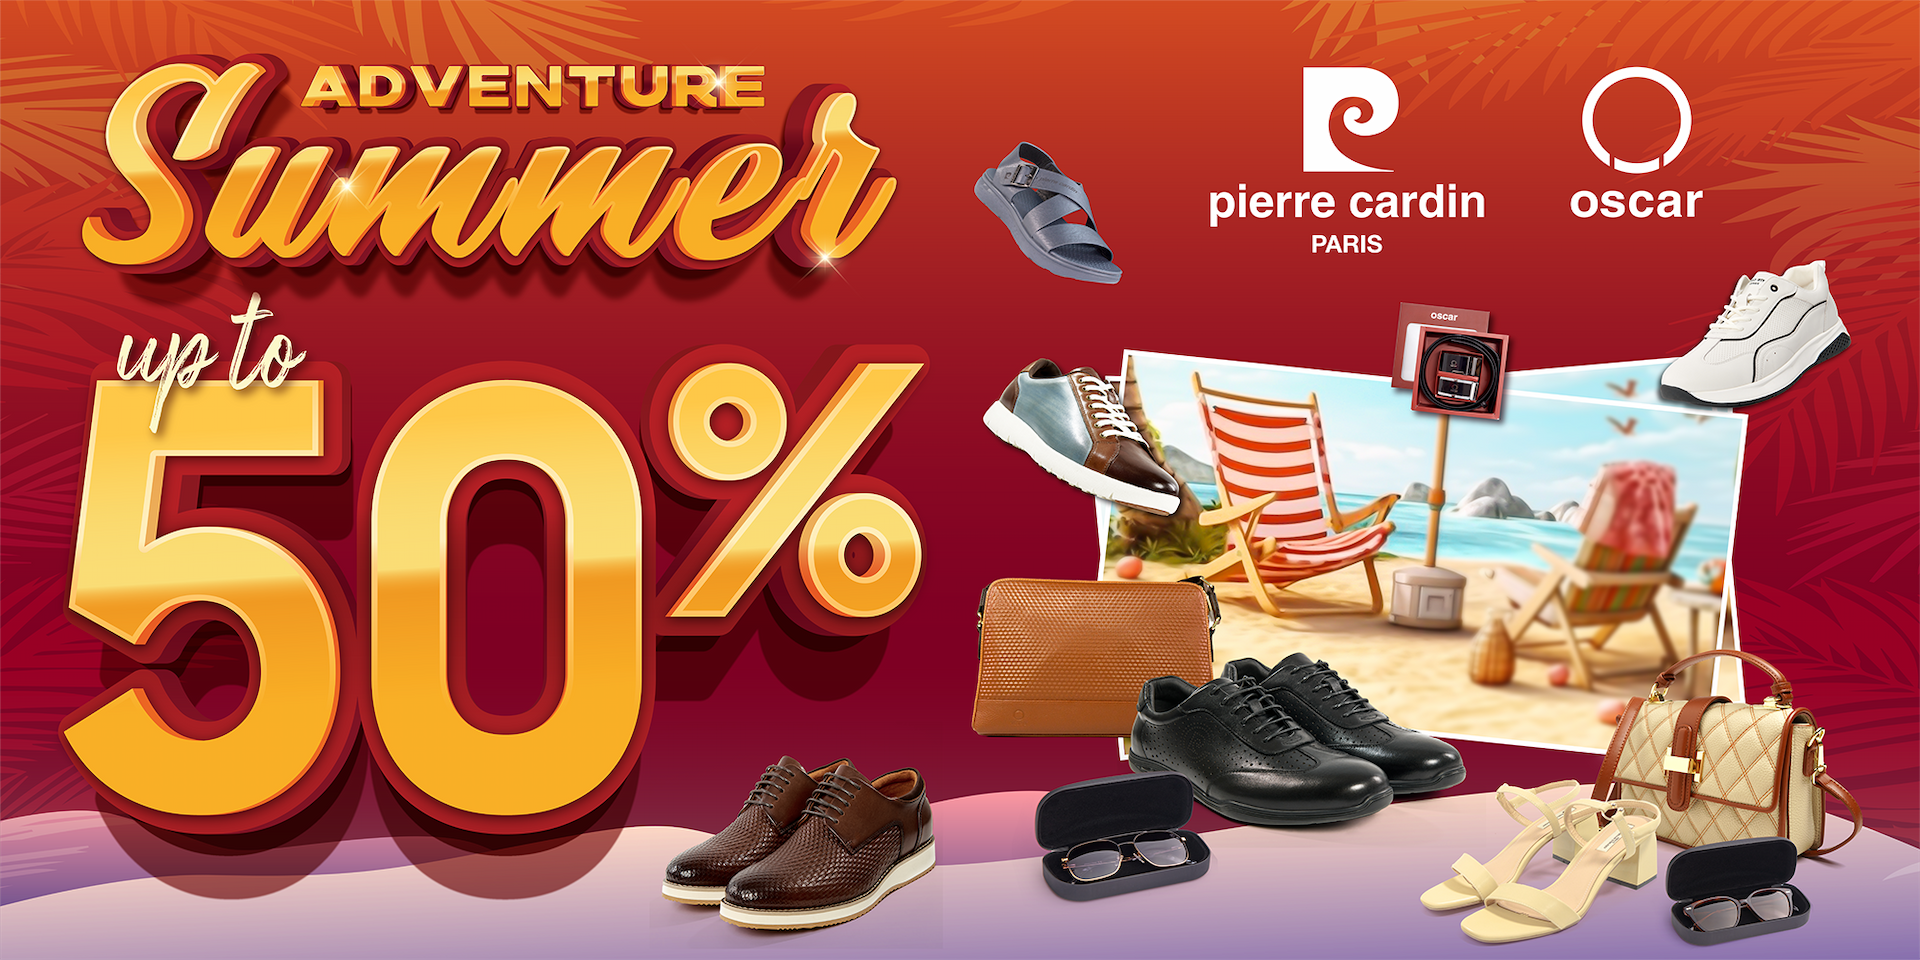 hello-summer-adventure-pierre-cardin-up-to-50-off-with-thousands-of-extremely-hot-promotional-products